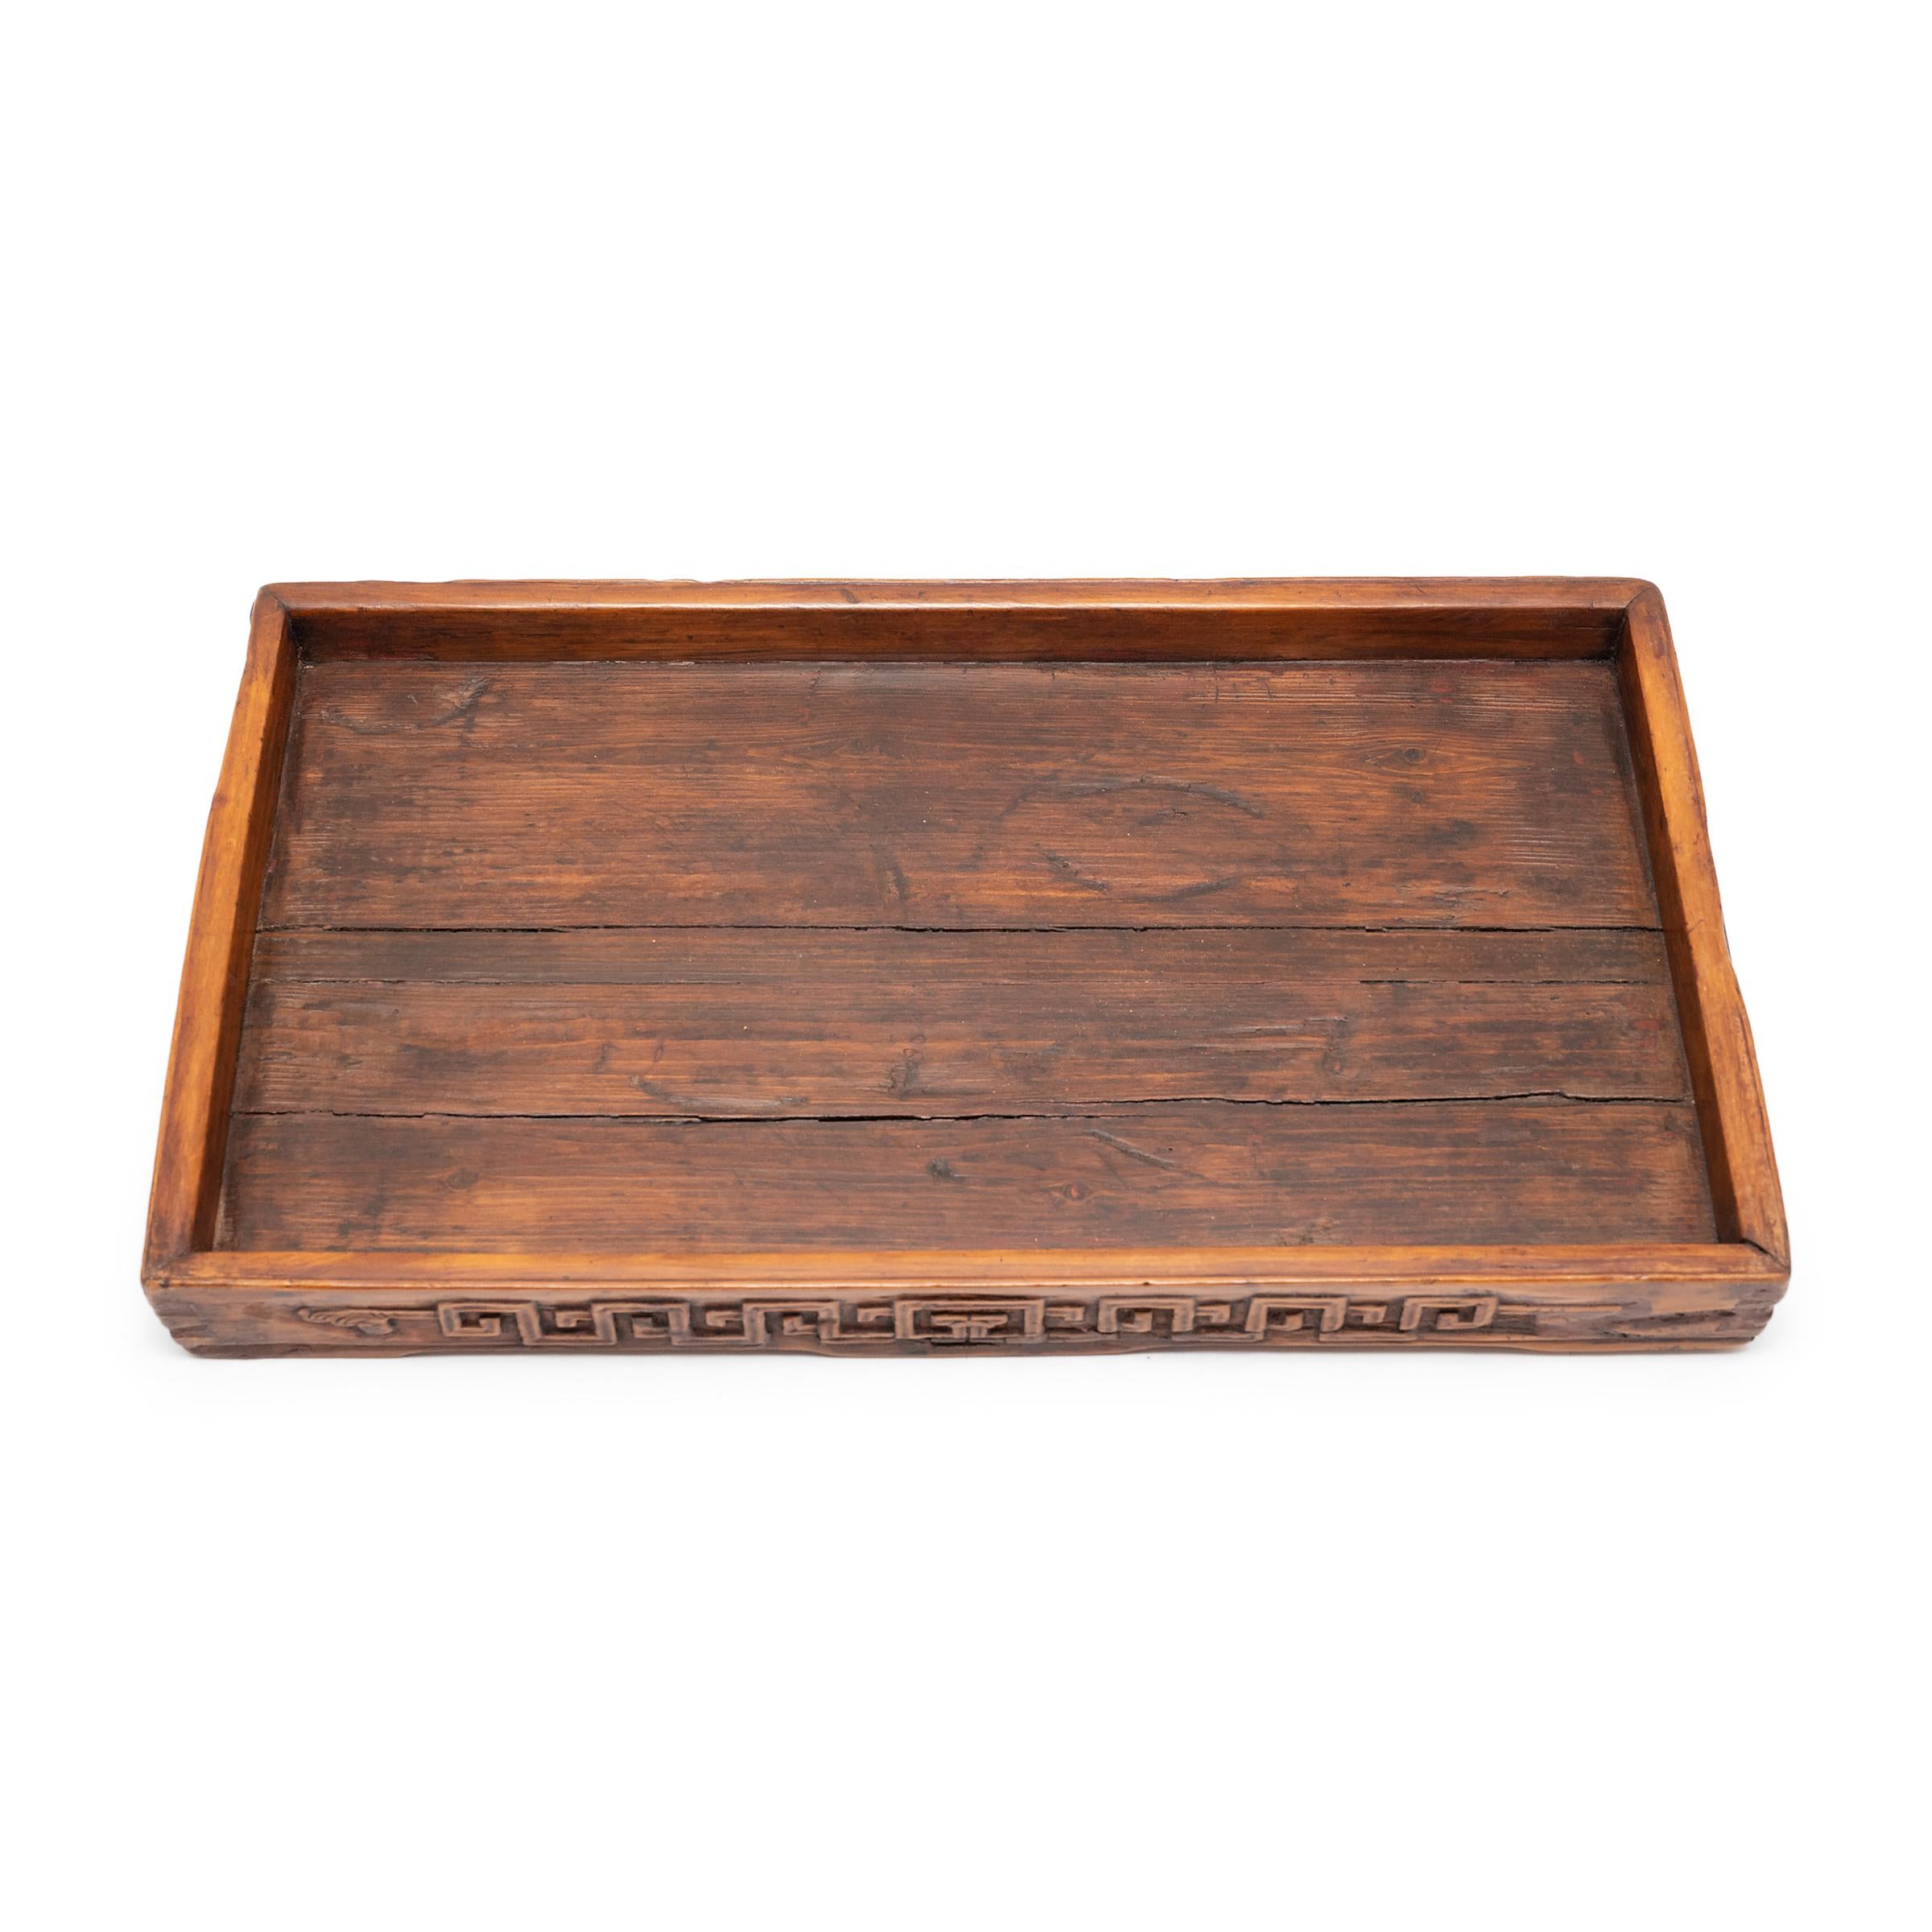 Carved geometric scrollwork and a subtly recessed base elevate the simple lines of this century-old wooden tea tray. The provincial platter has developed great character from years of serving tea, likely for friends and family gathered on